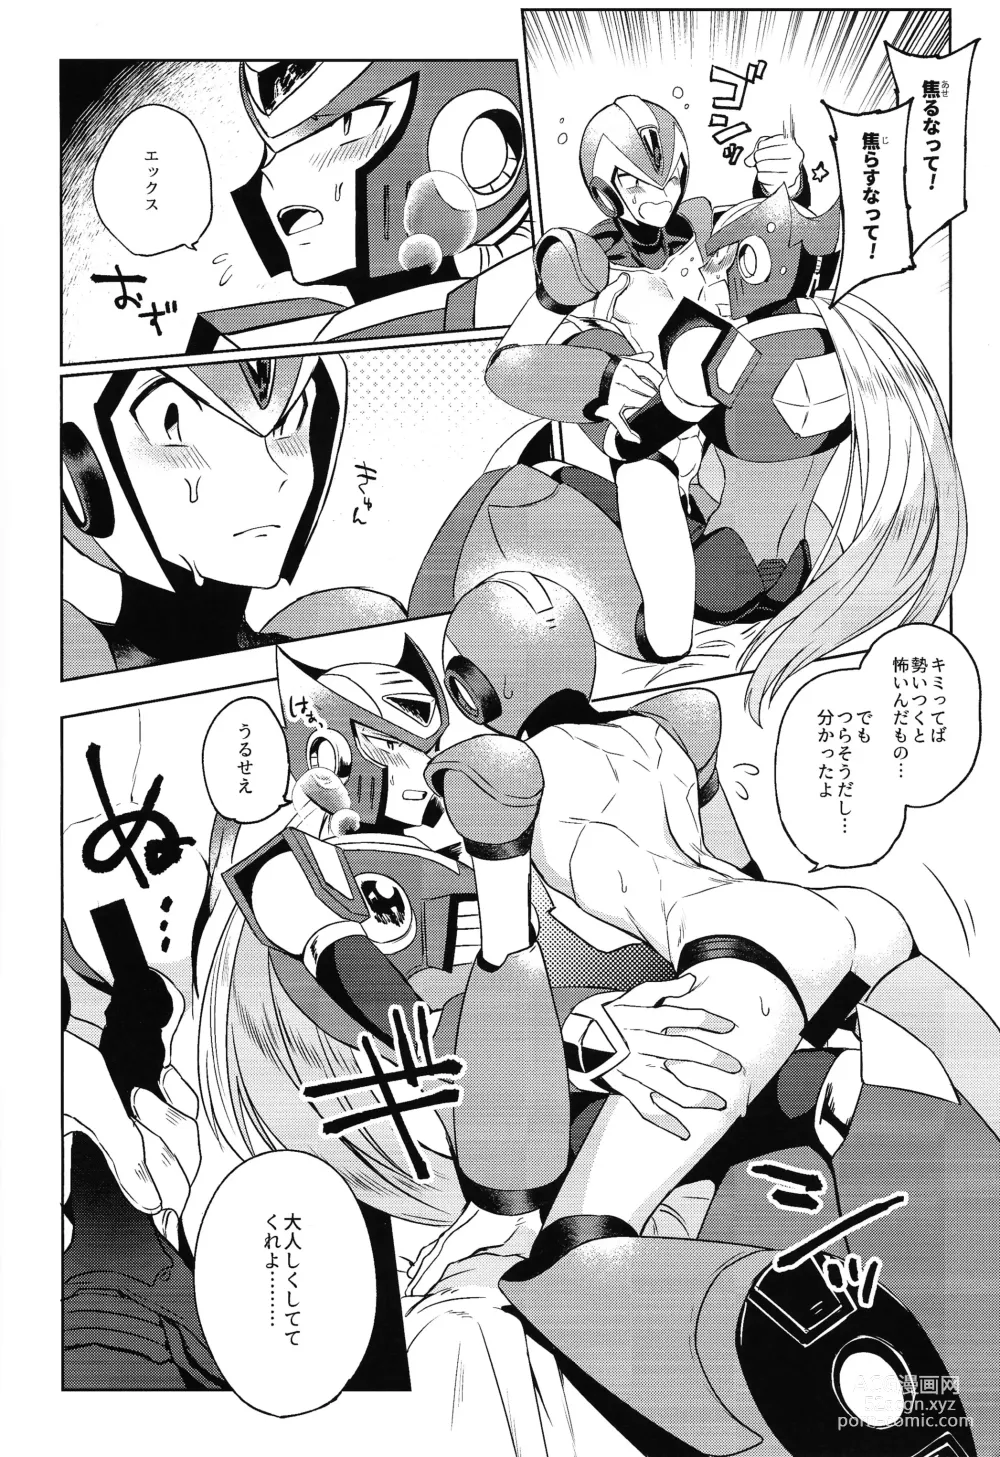 Page 13 of doujinshi HYPER EMERGENCY CALL